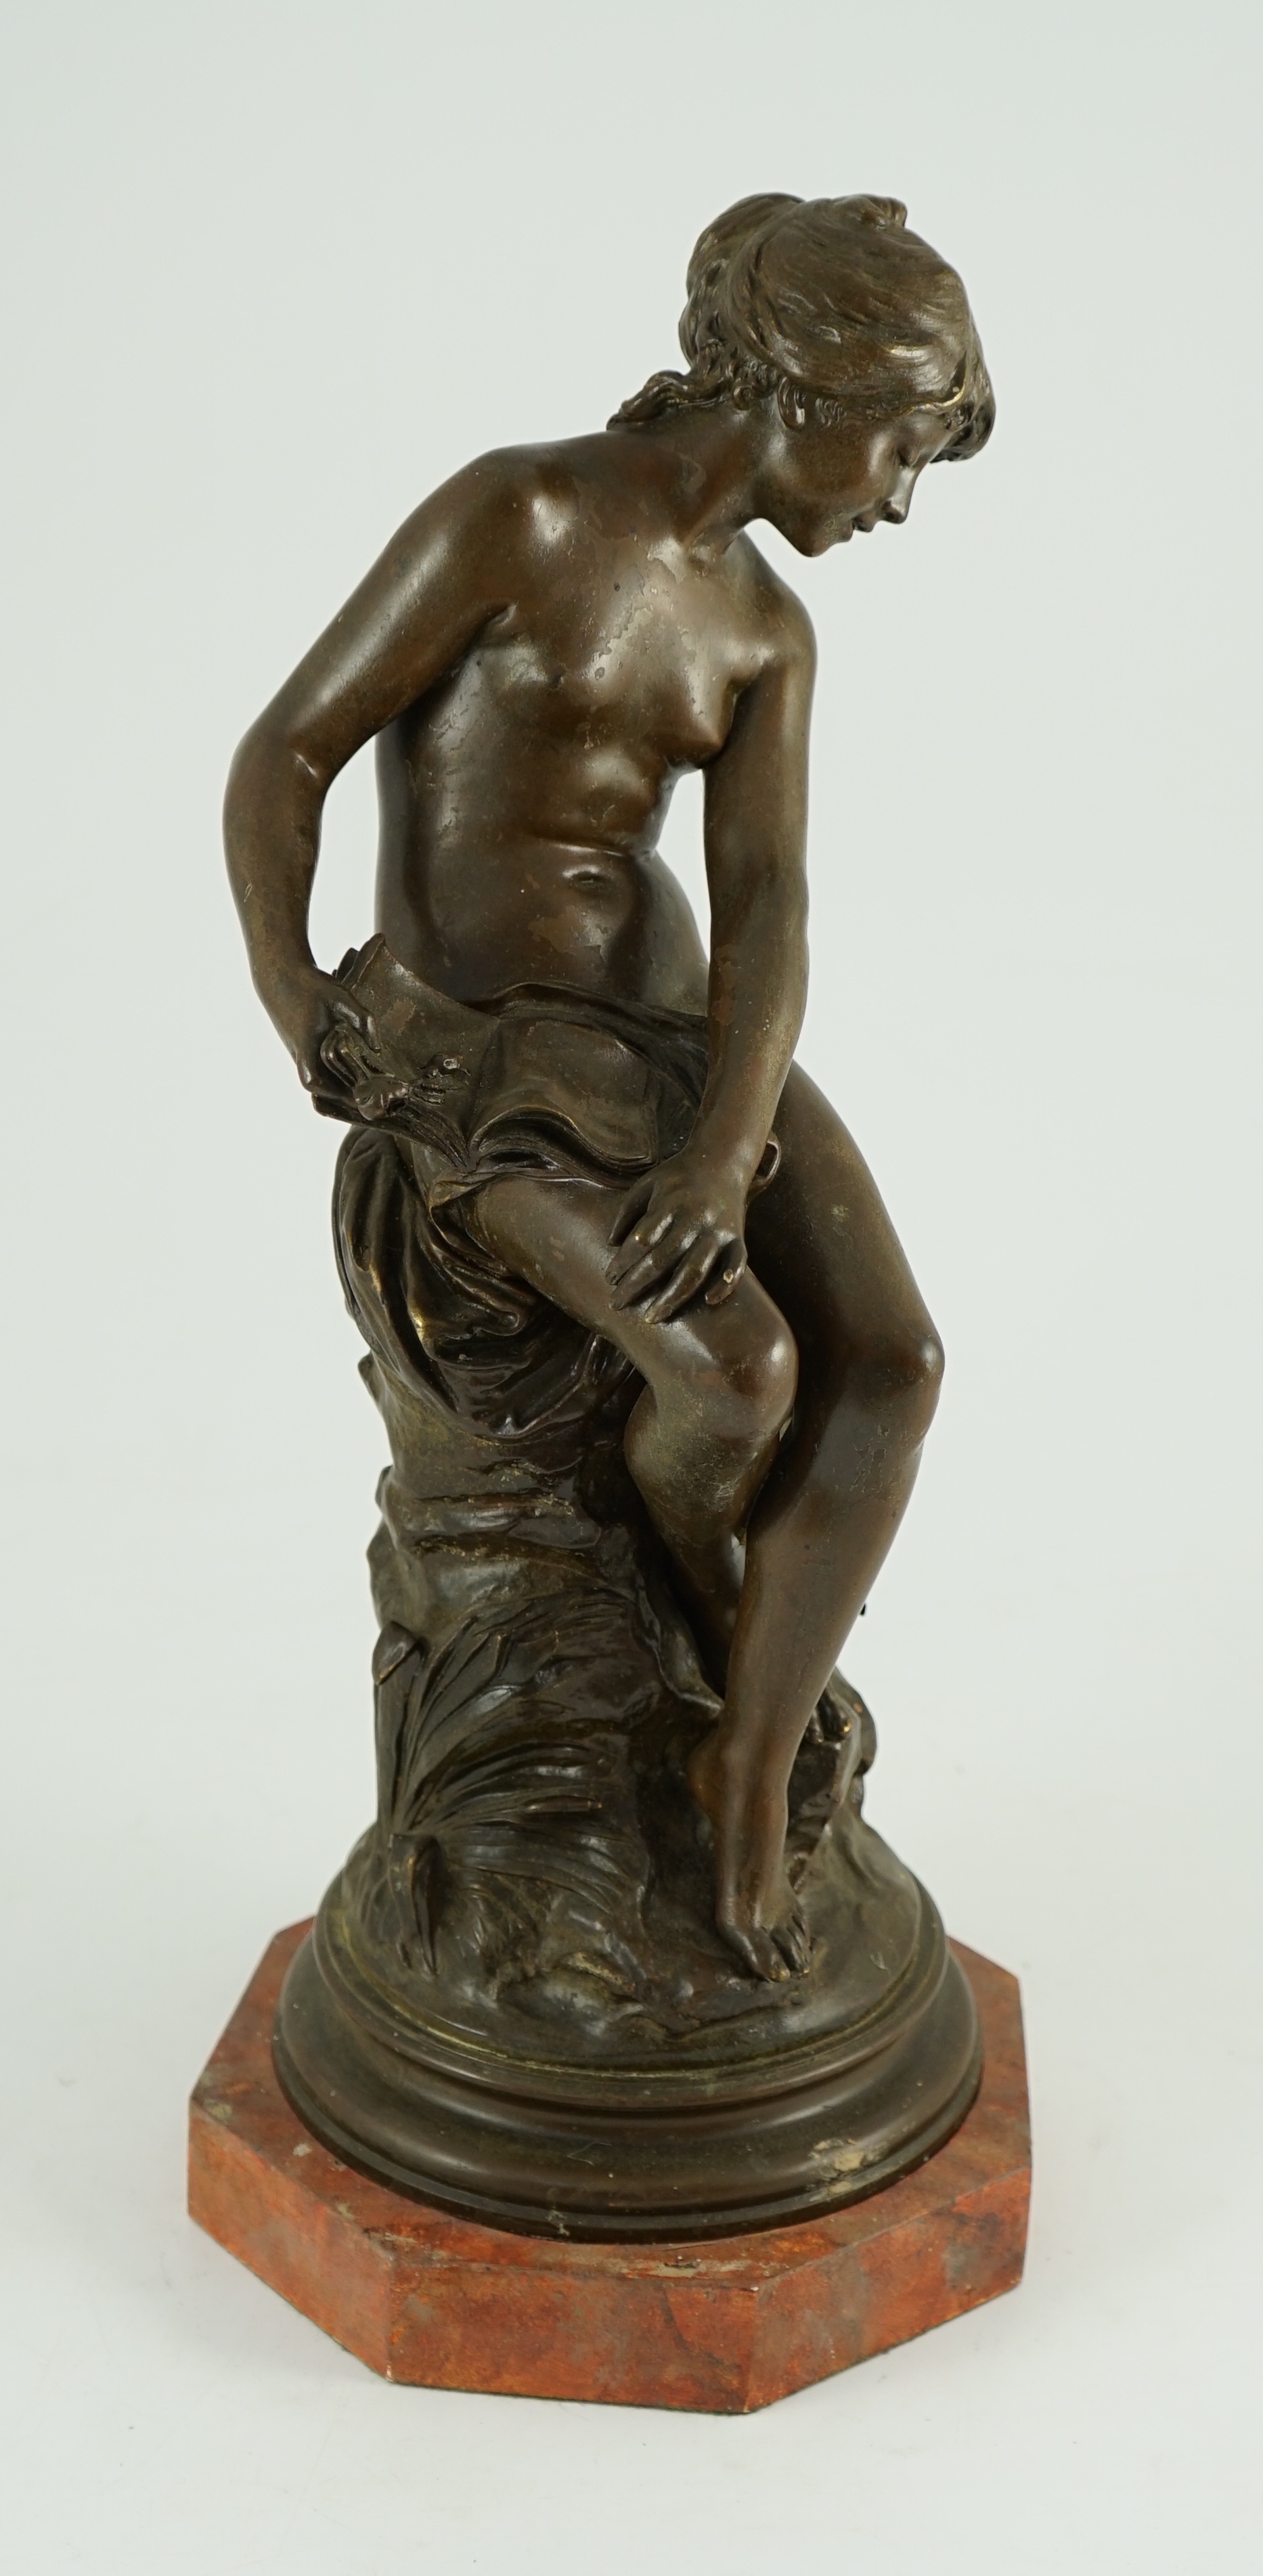 Auguste Moreau (French, 1834-1917). A bronze figure of a nude girl seated on a mound holding a book with birds at her feet, overall height 45cm